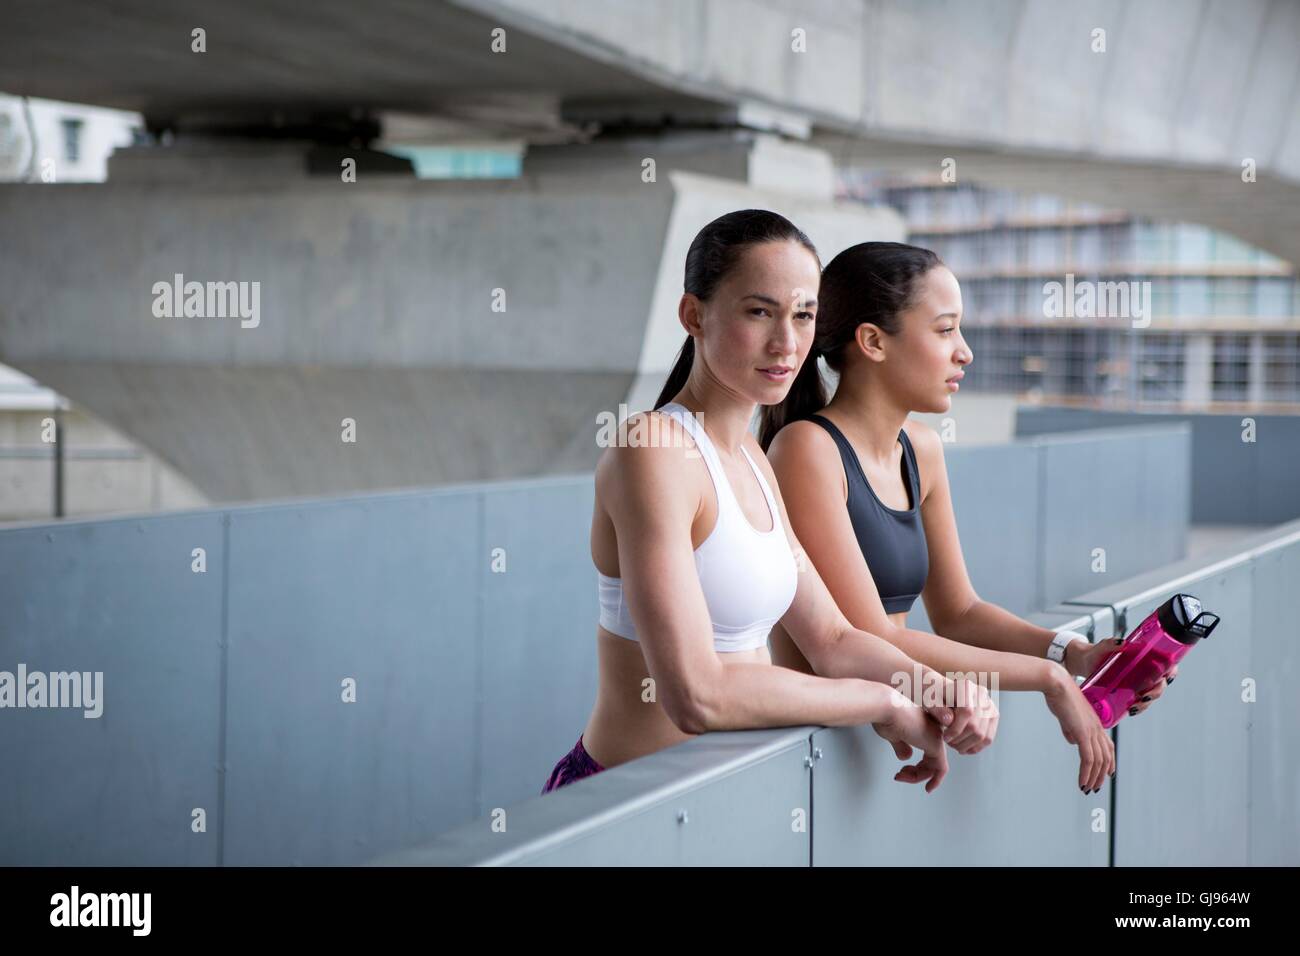 MODEL RELEASED. Two young women in sports clothing resting. Stock Photo